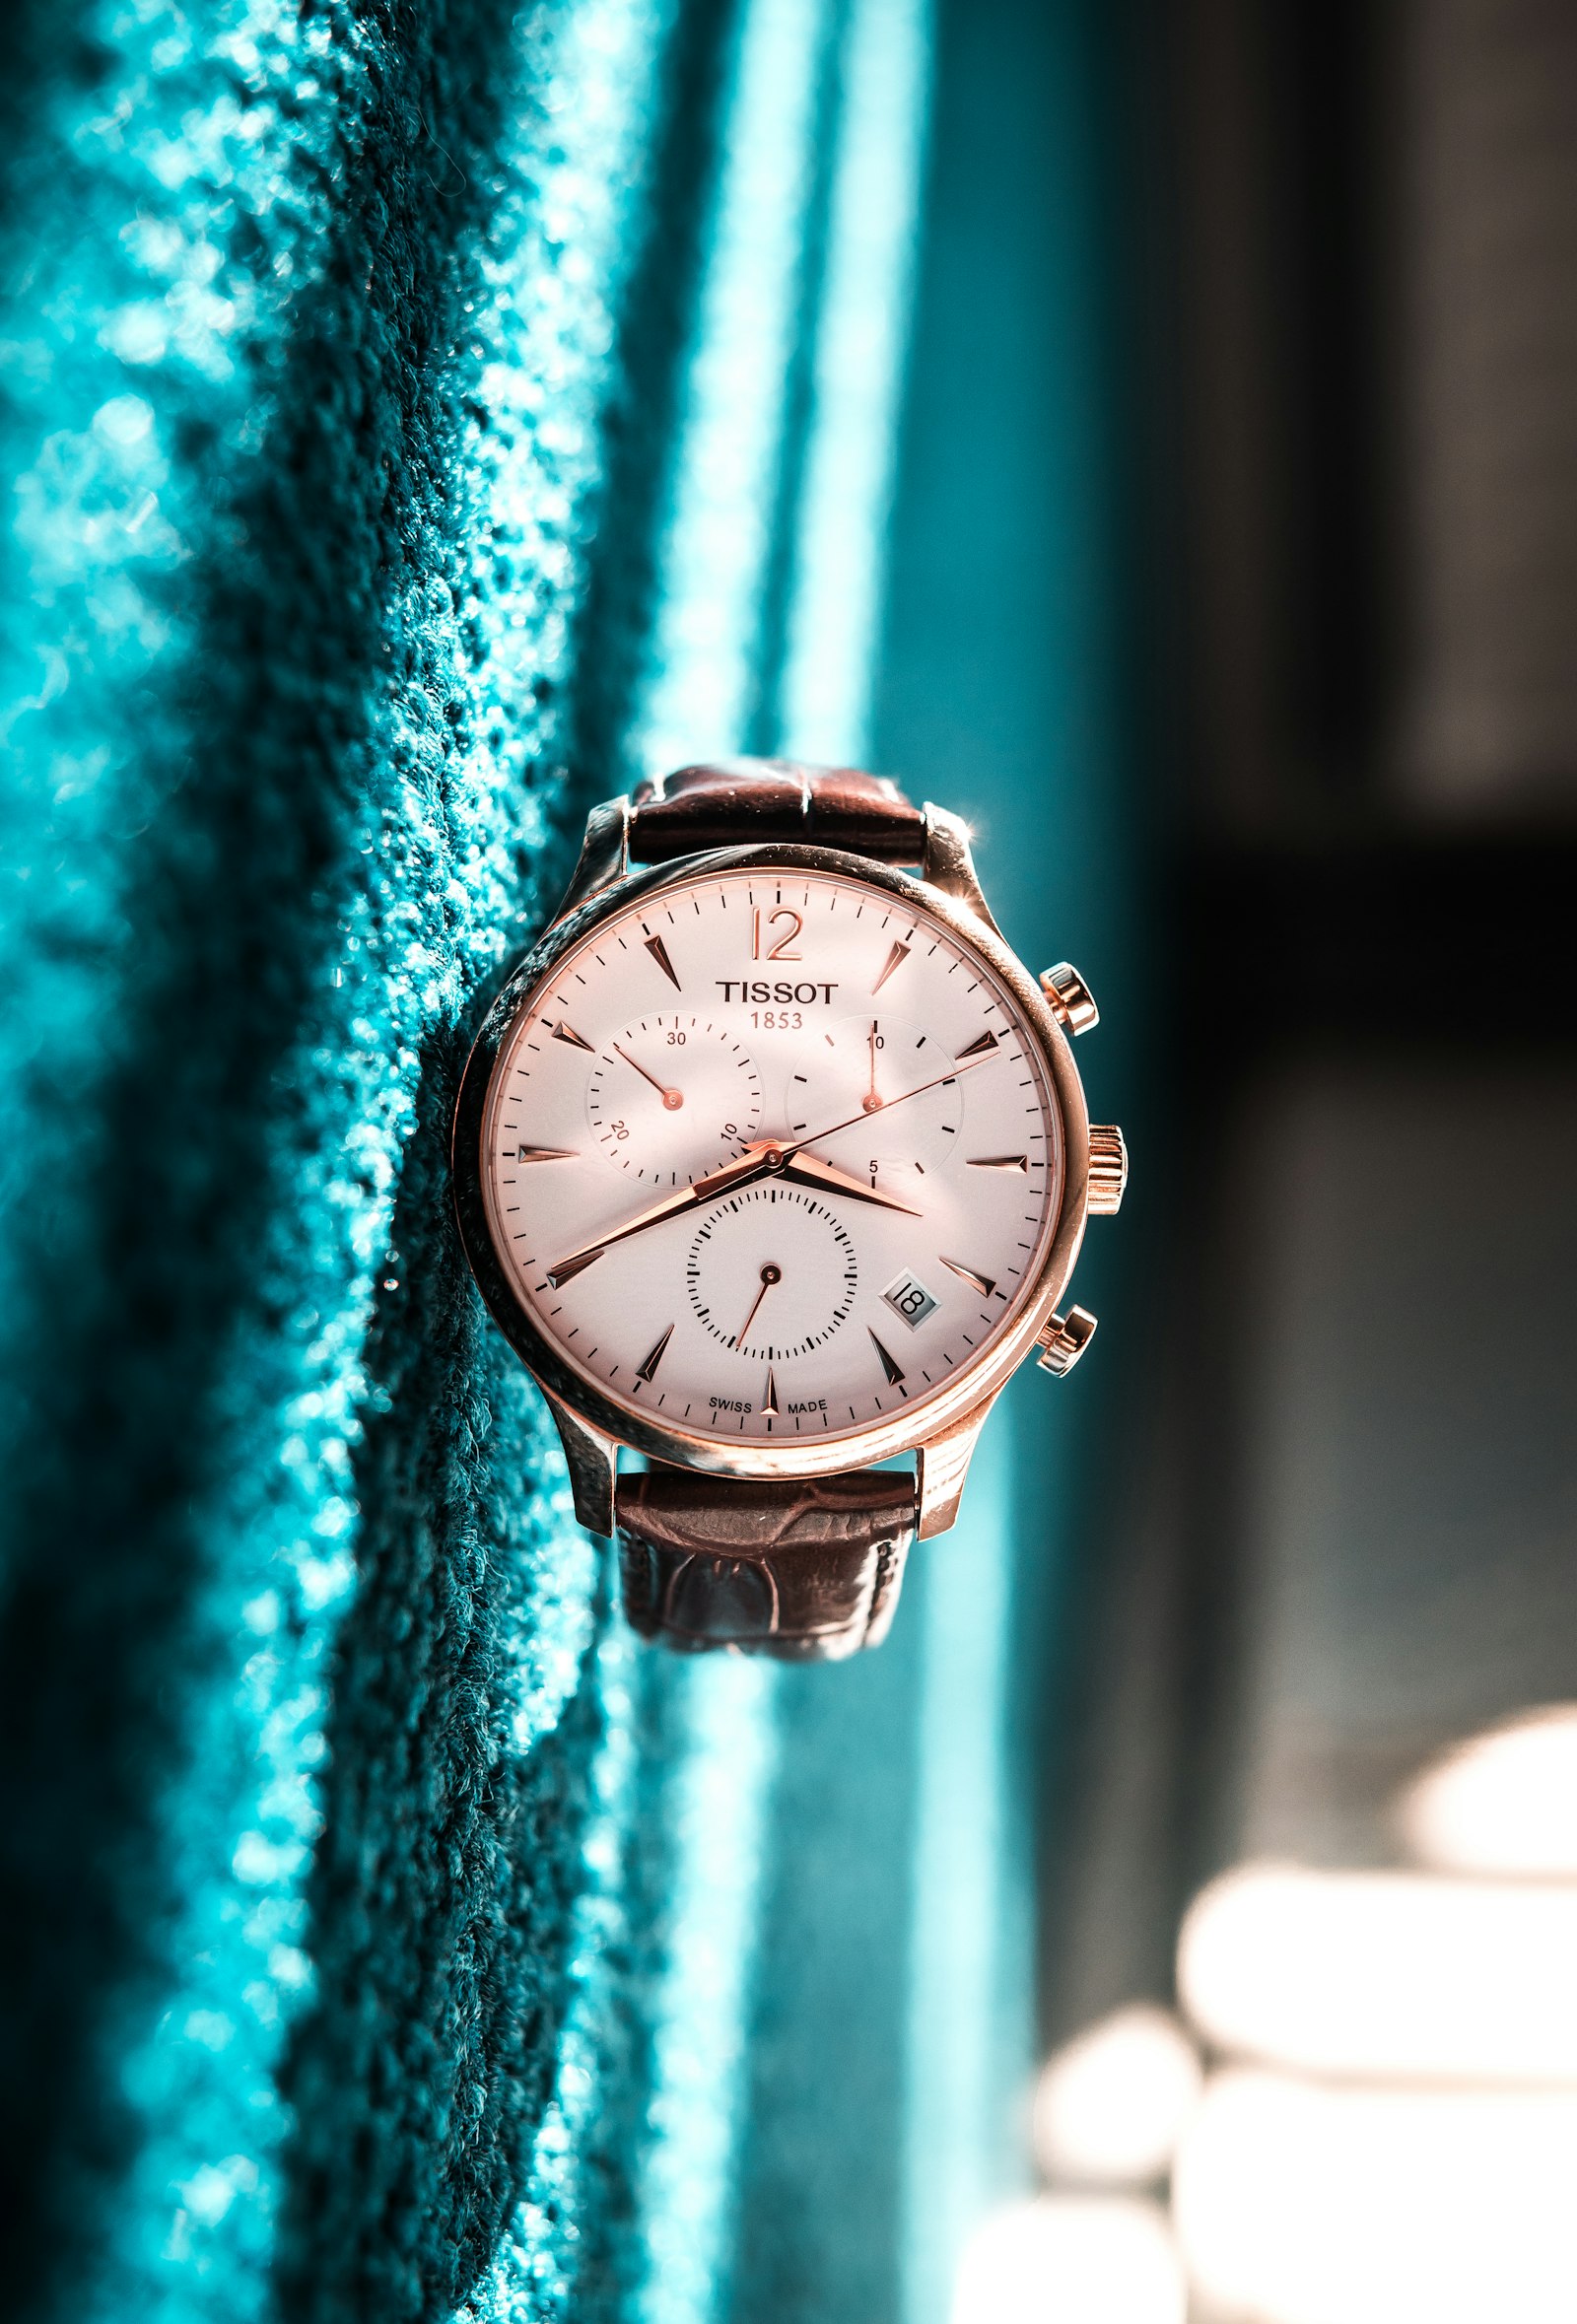 .7x Sigma DC 18-35/1.8 HSM sample photo. Round silver-colored tissot chronograph photography